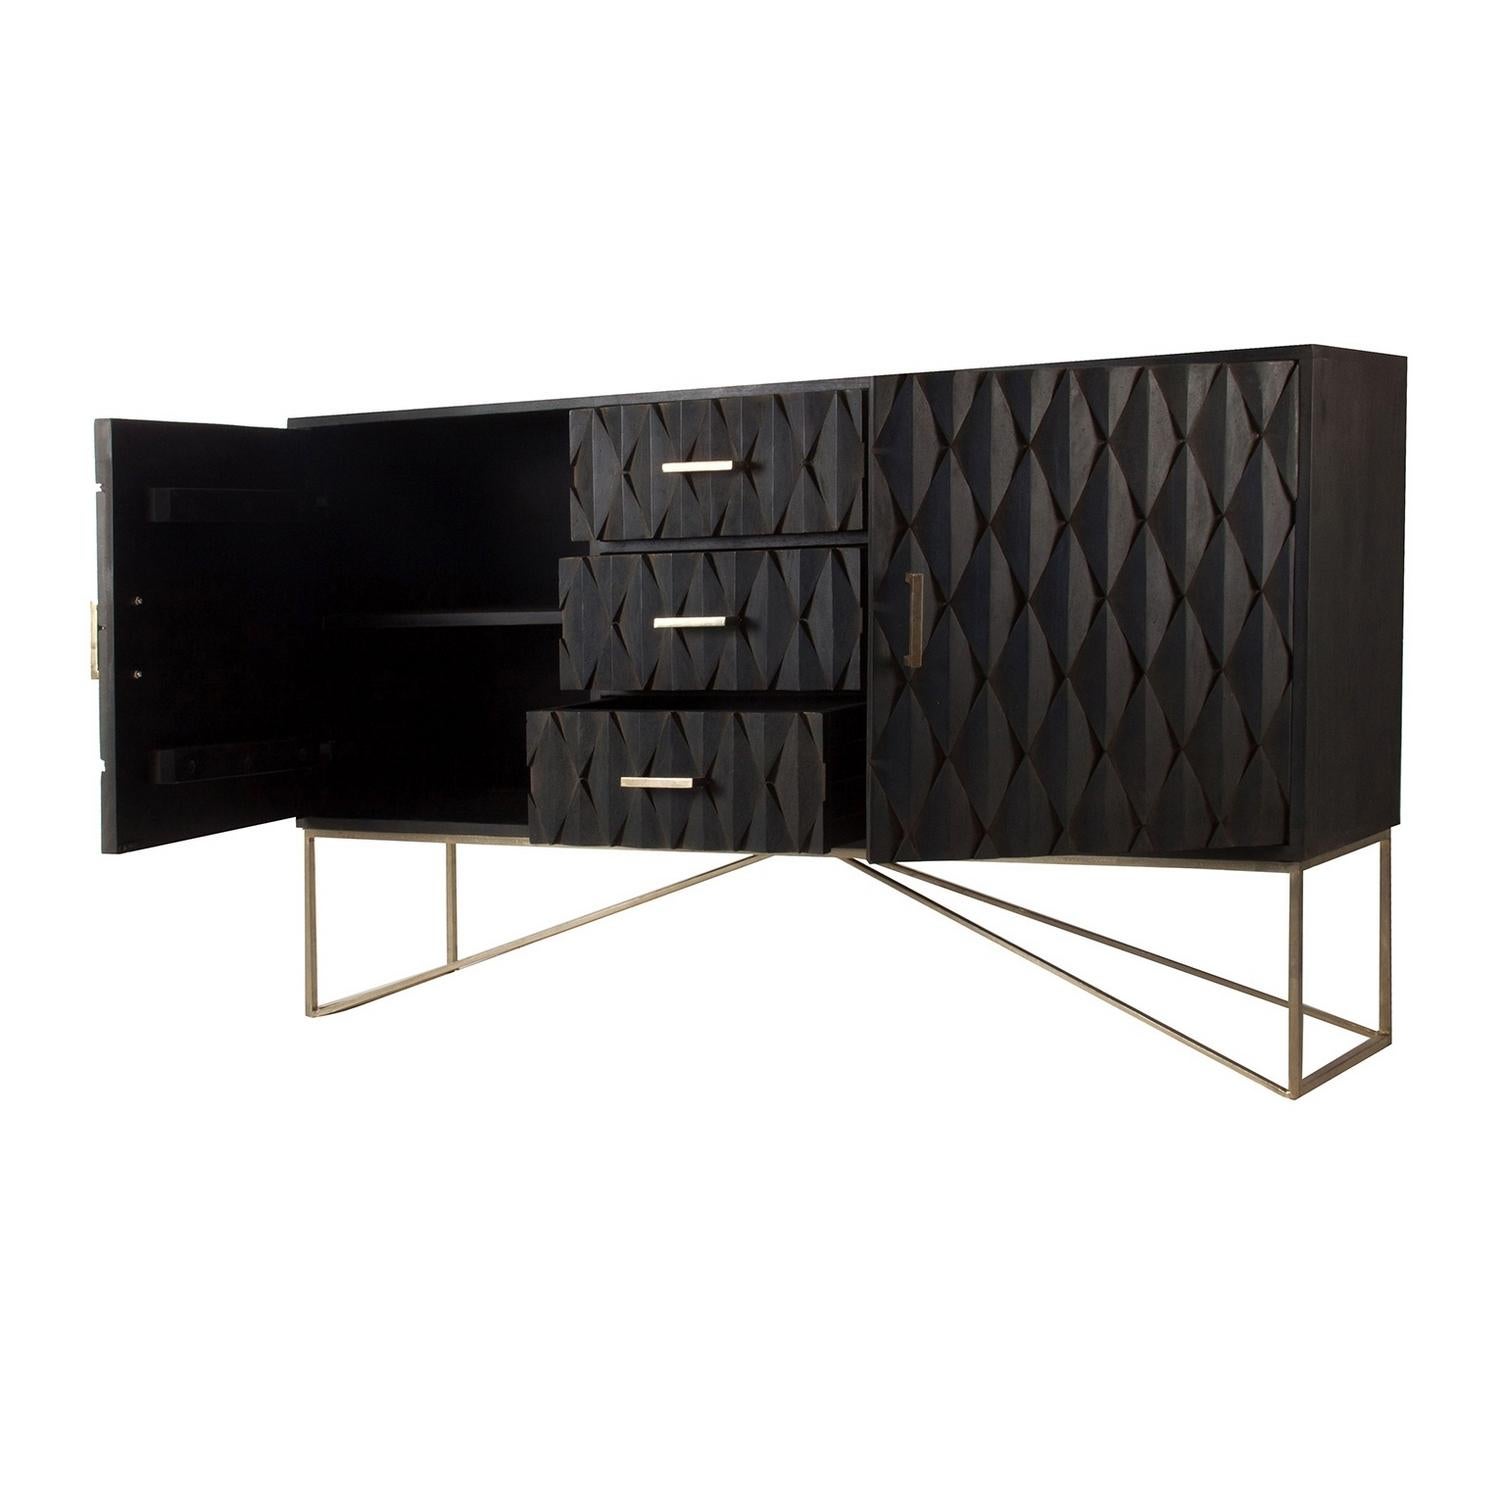 Brutalist style sideboard: An eyecatcher with geometrical and harmonious lines, composed of 2 graphic panels side doors, 3 central drawers with gilded handles and airy metal feet.